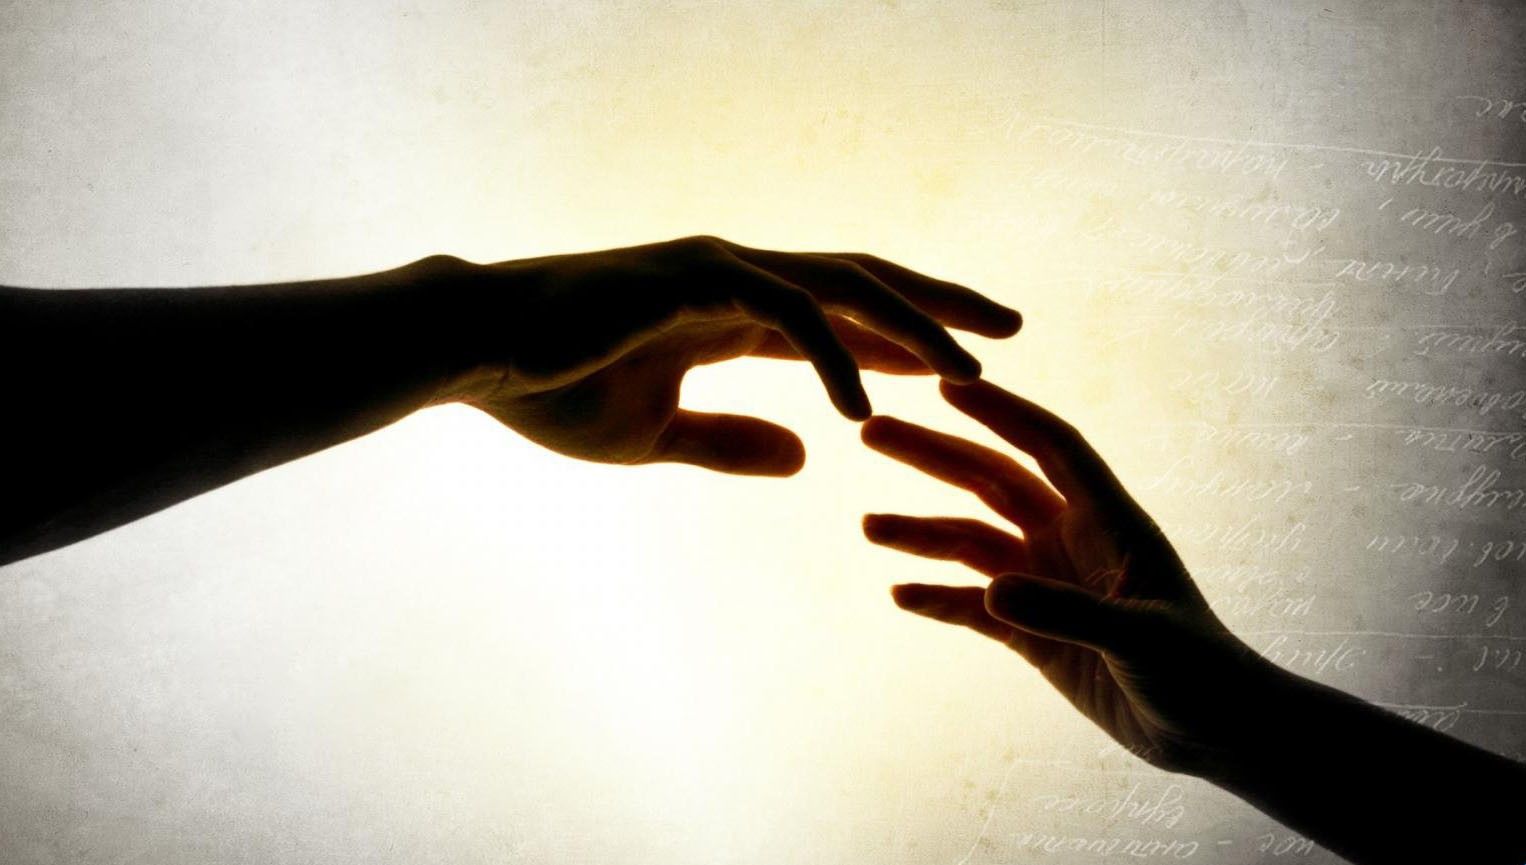 5 Intrinsic Benefits of Helping Others